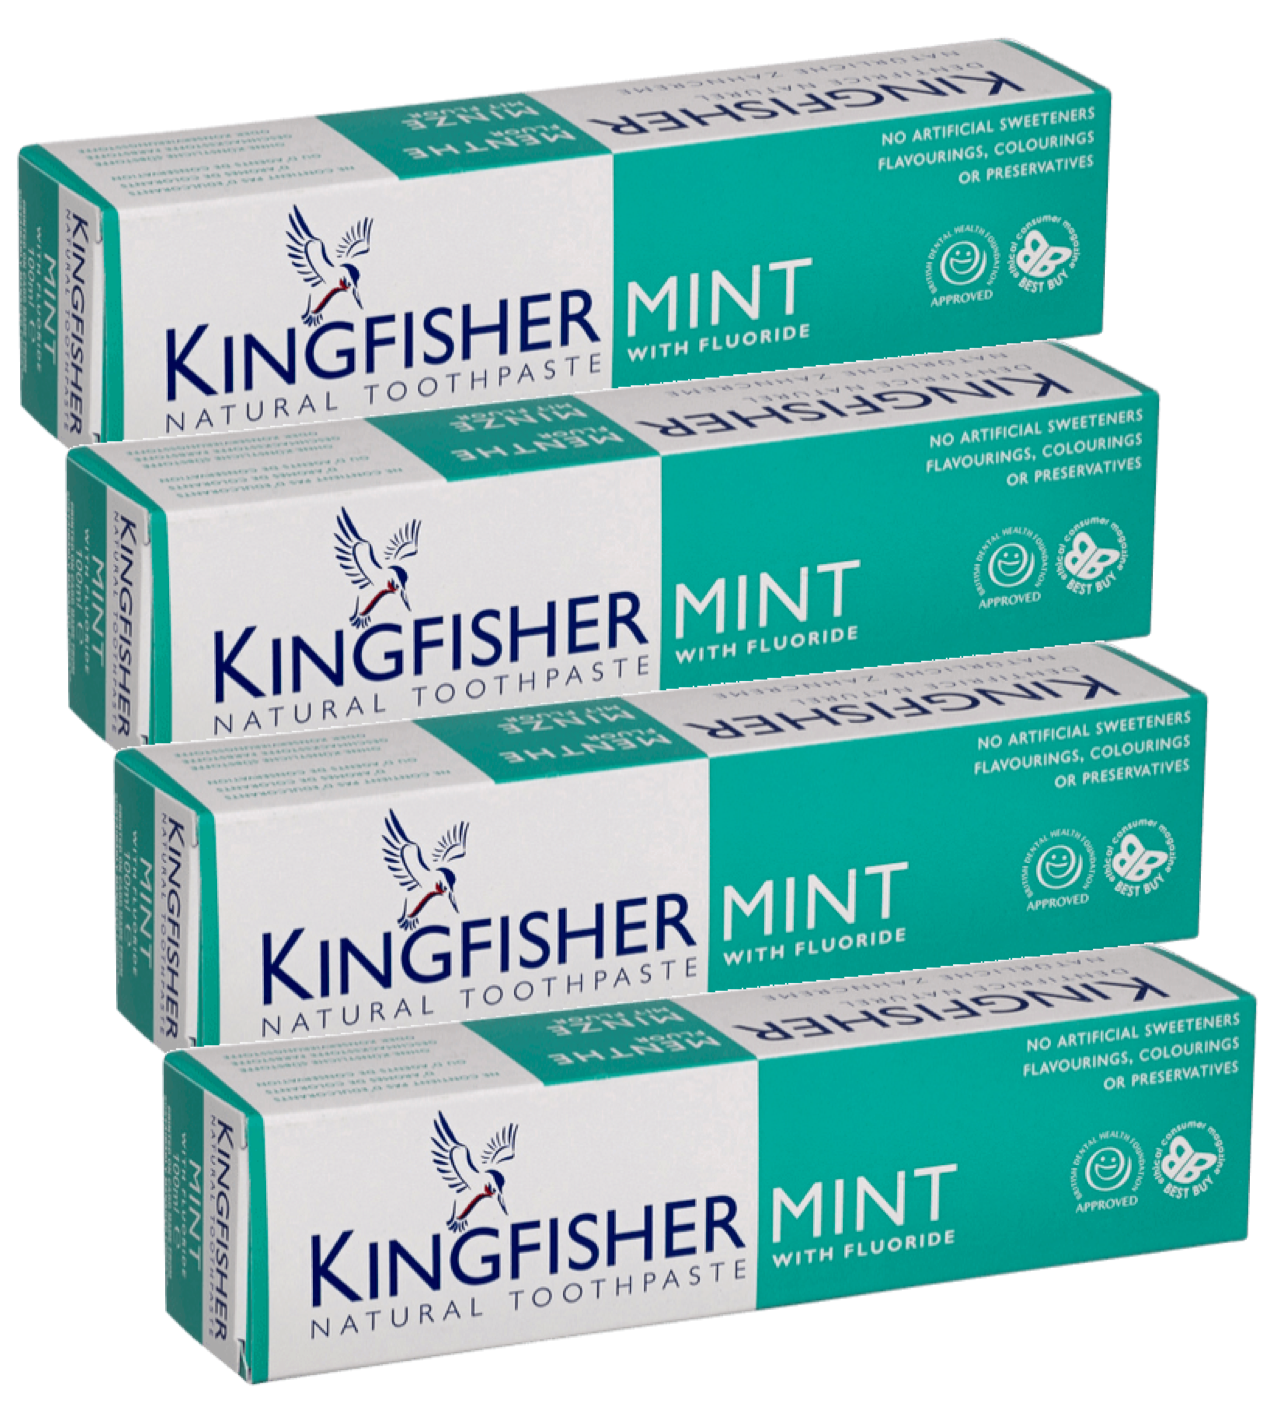 Kingfisher Toothpaste - Mint with Fluoride Toothpaste (100ml) - Pack of 4